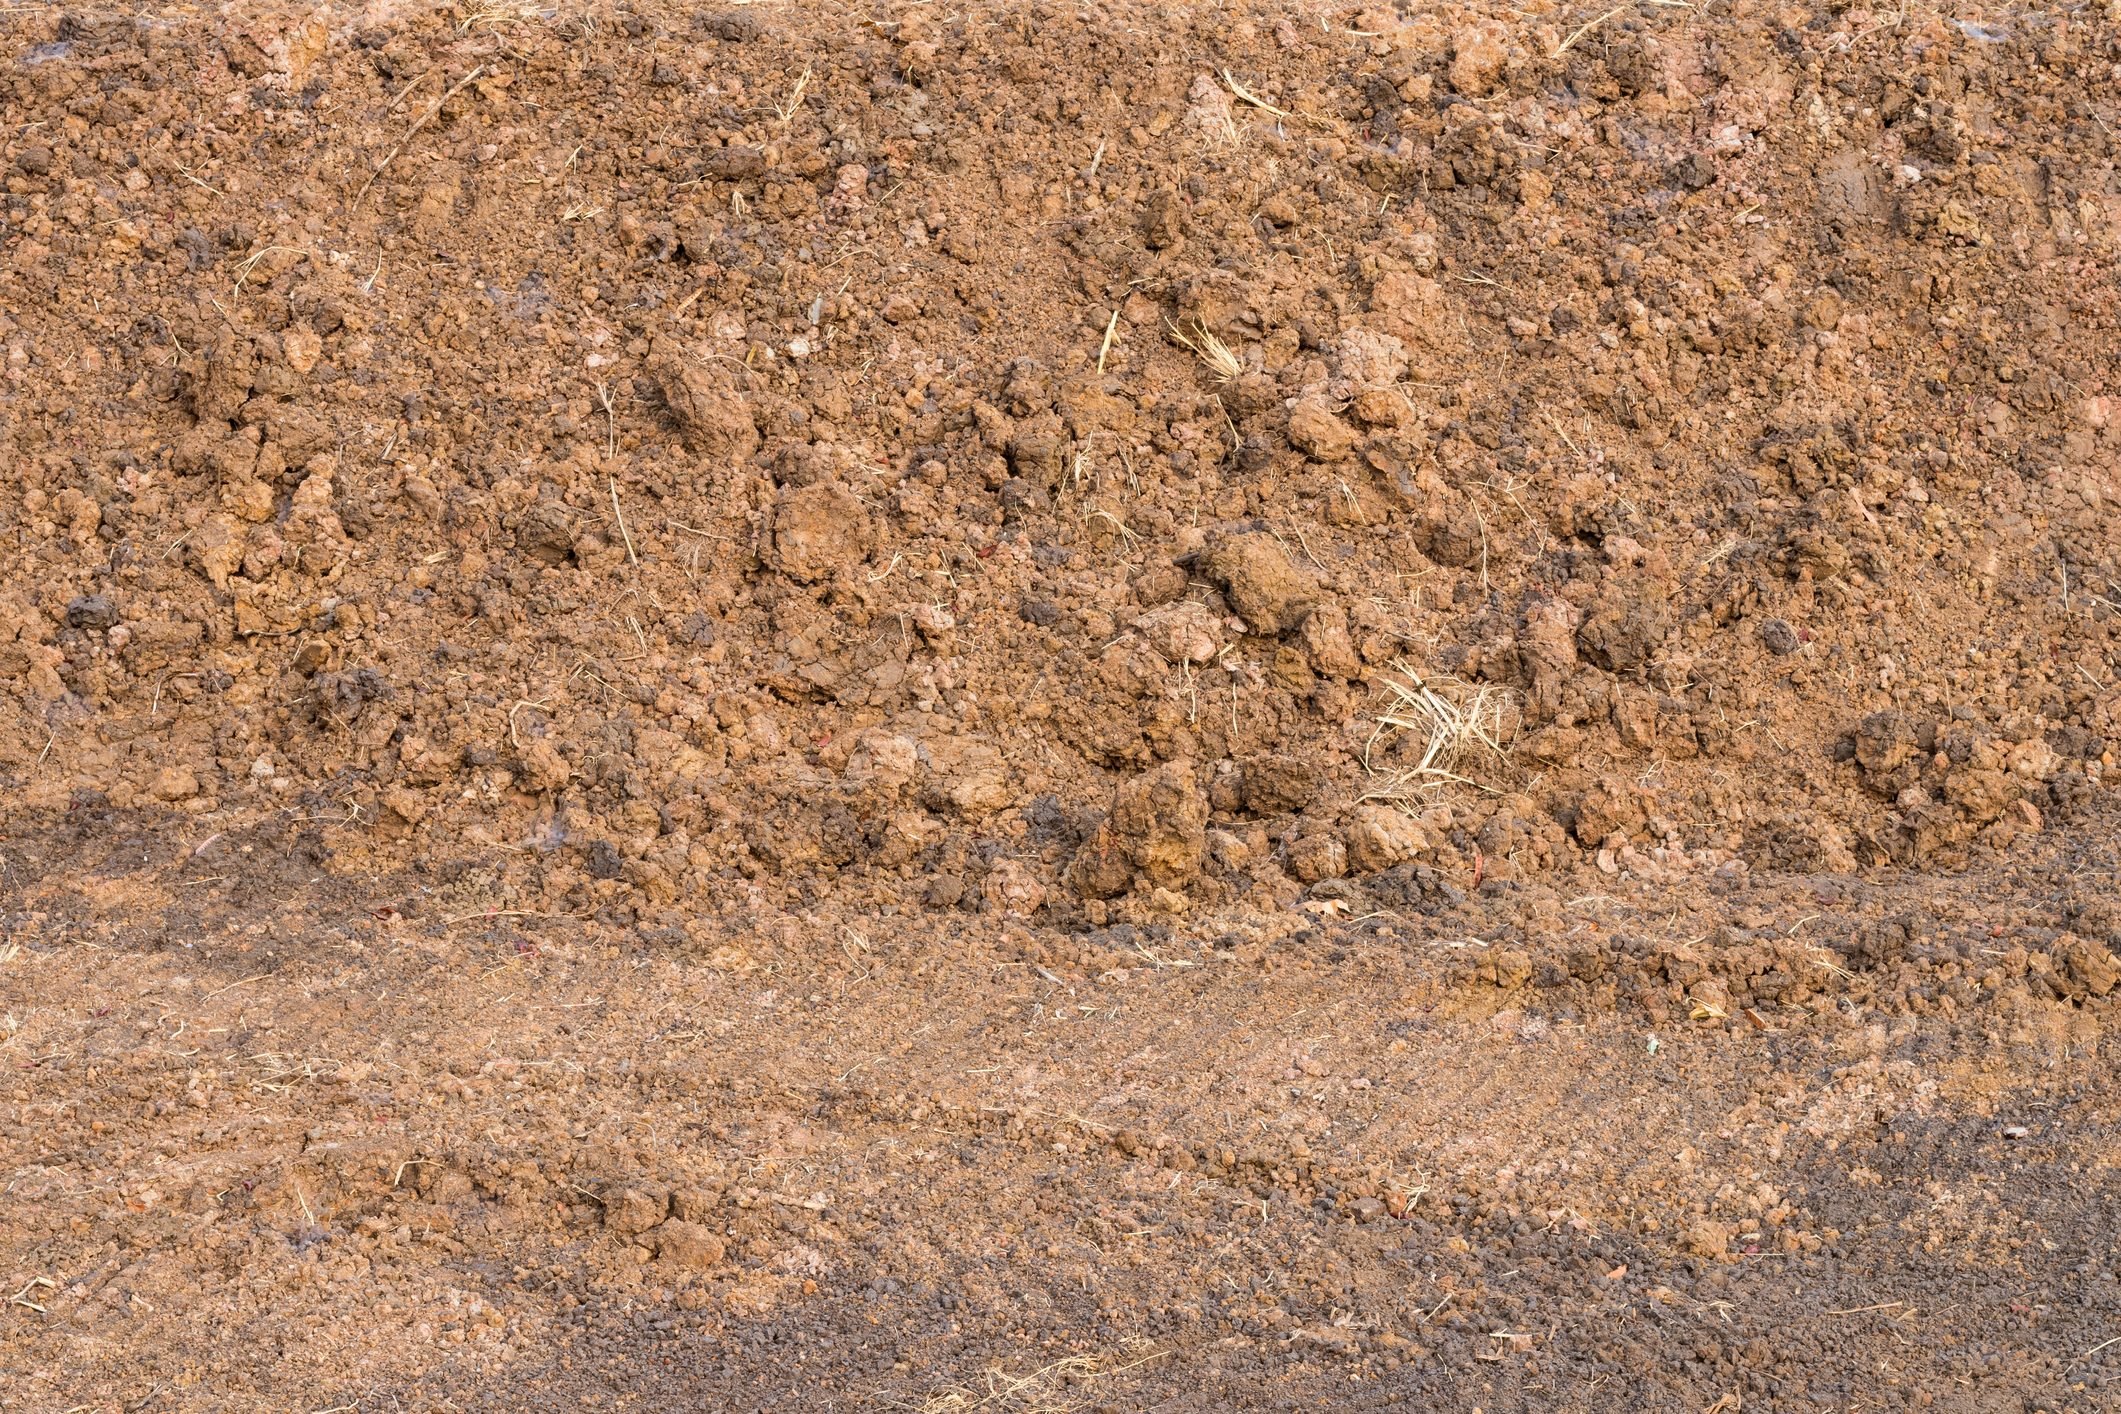 Surface of pile of loamy soil